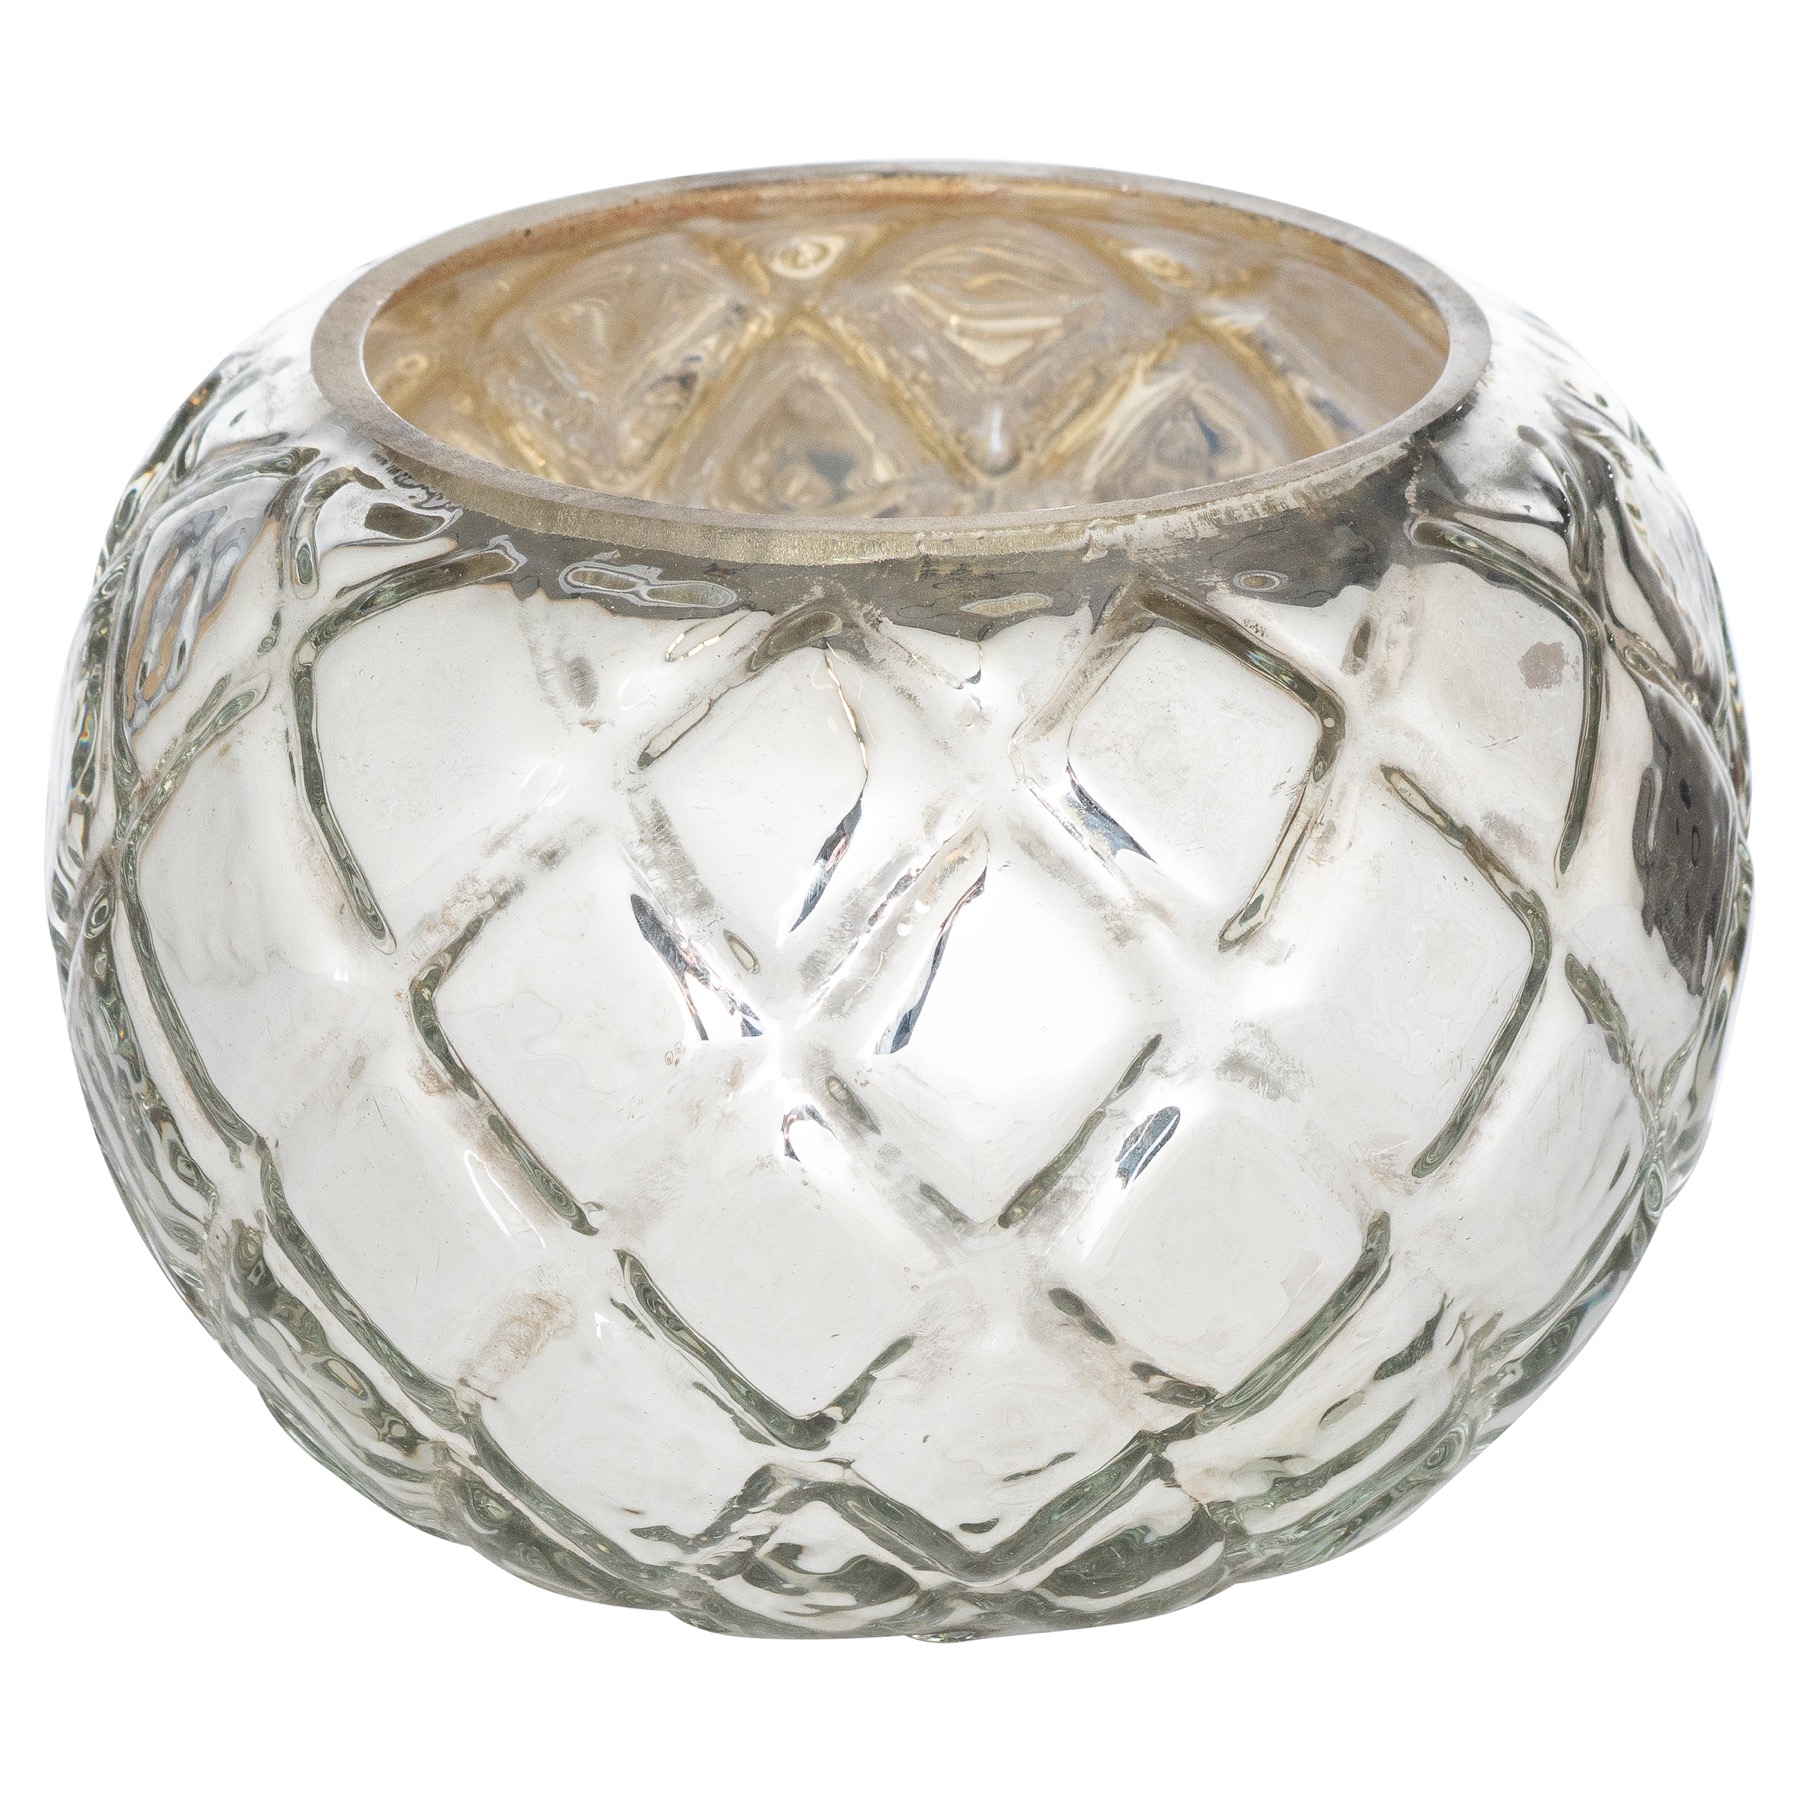 The Noel Collection Silver Etched Tealight Holder - Image 1